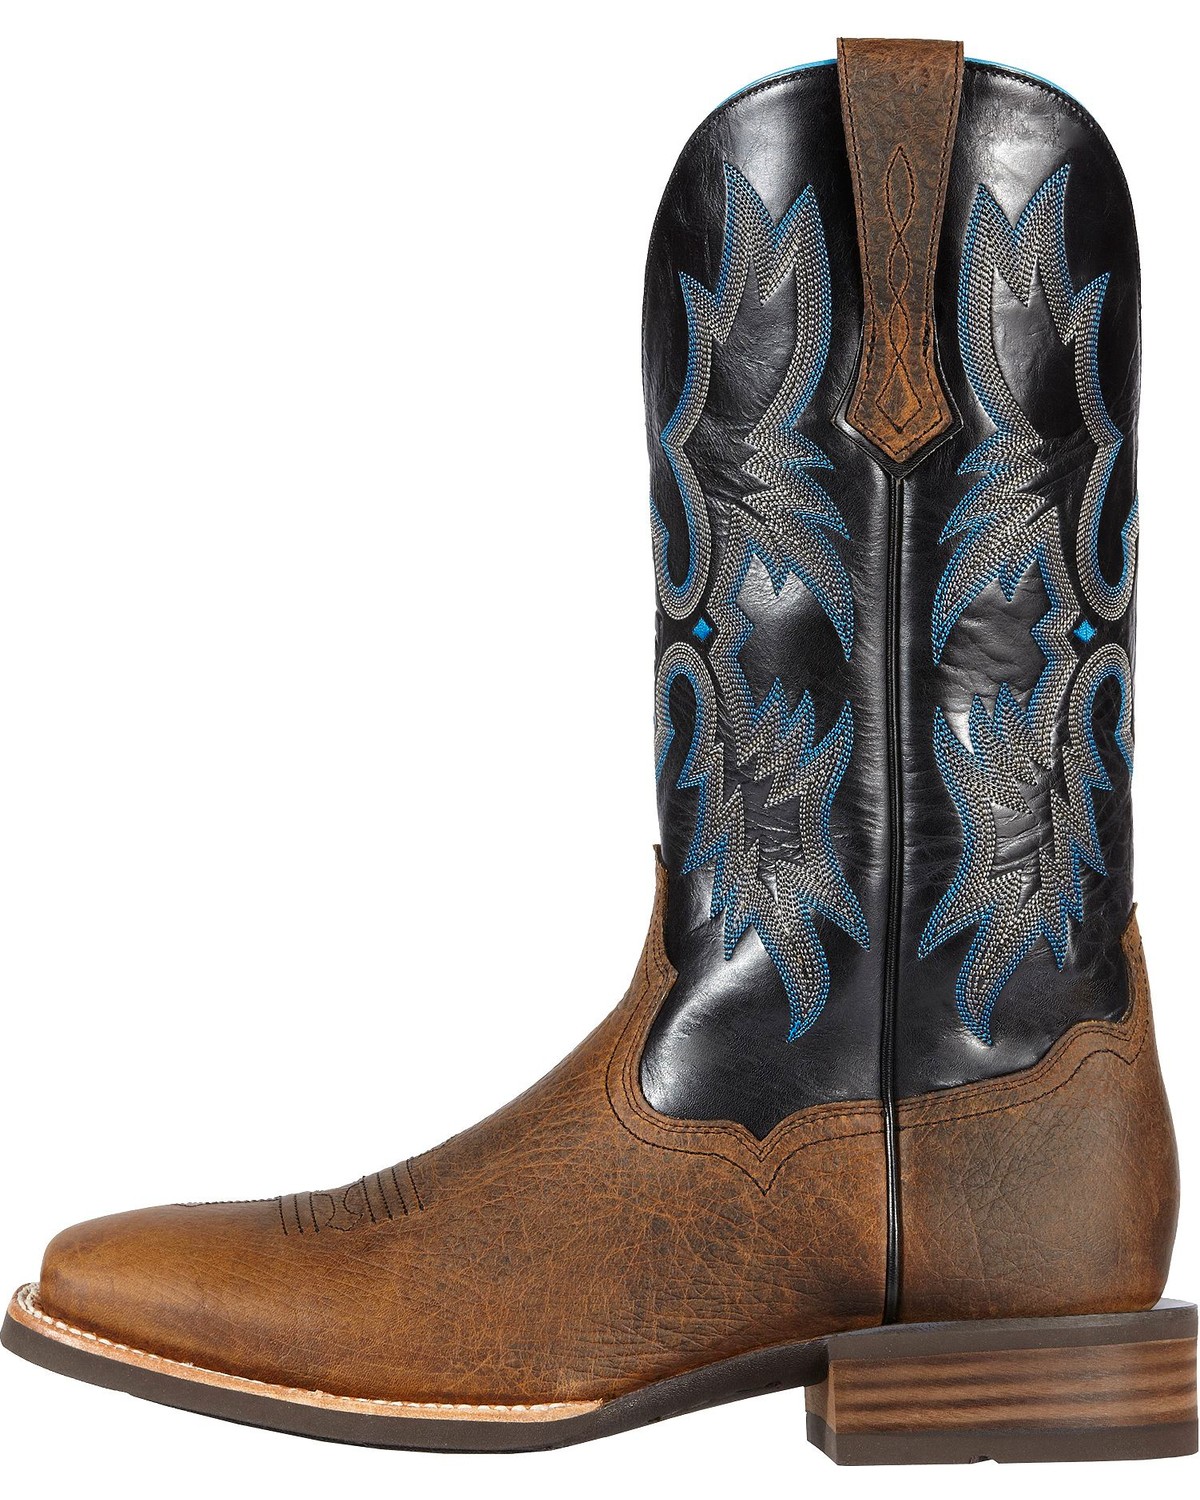 Ariat Tombstone Cowboy Boots - Wide Square Toe - Country Outfitter